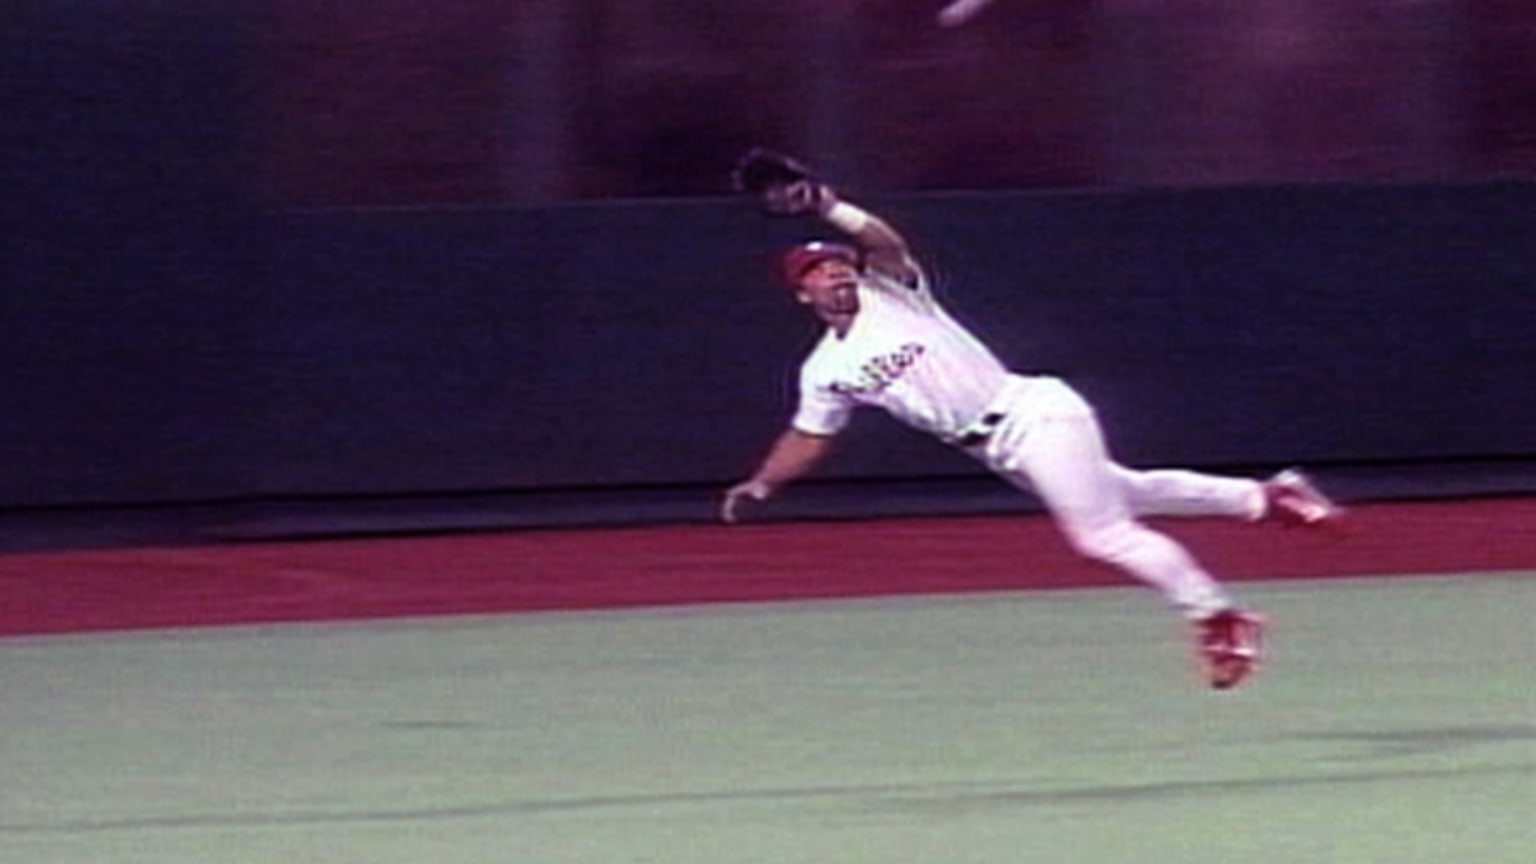 Top 5 diving catches in MLB history #mlb #divingcatch #goldglove